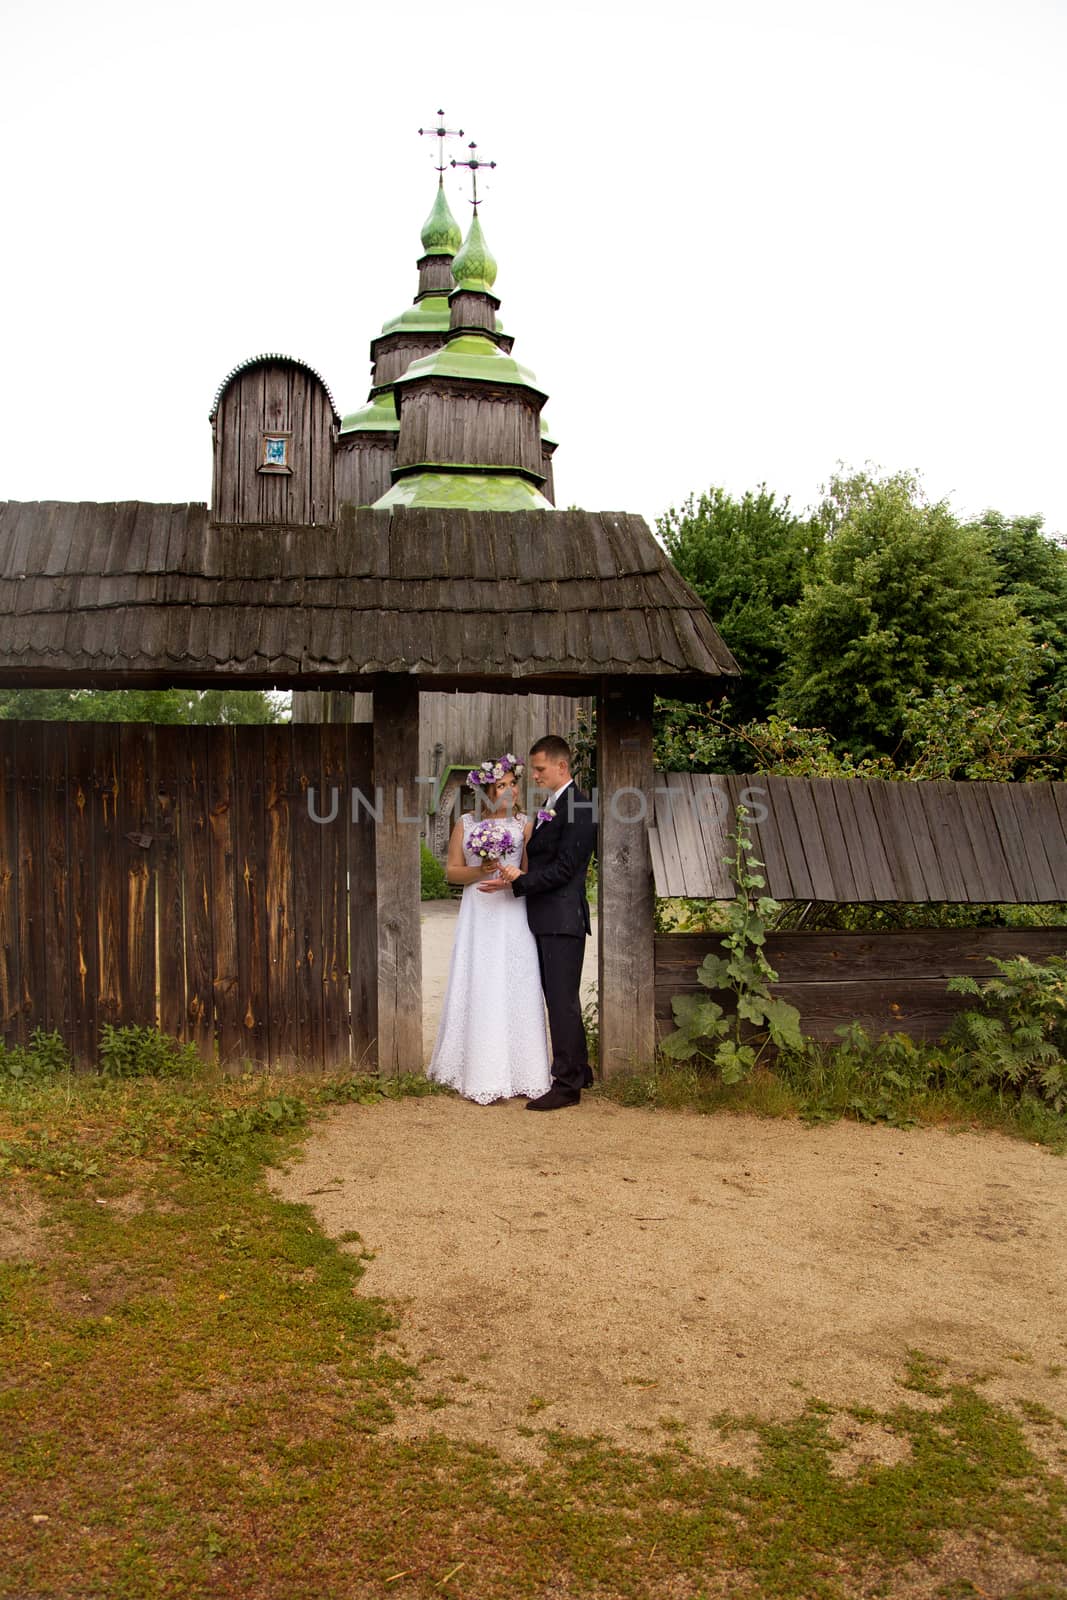 groom gently embraces the bride on walk in the country by lanser314